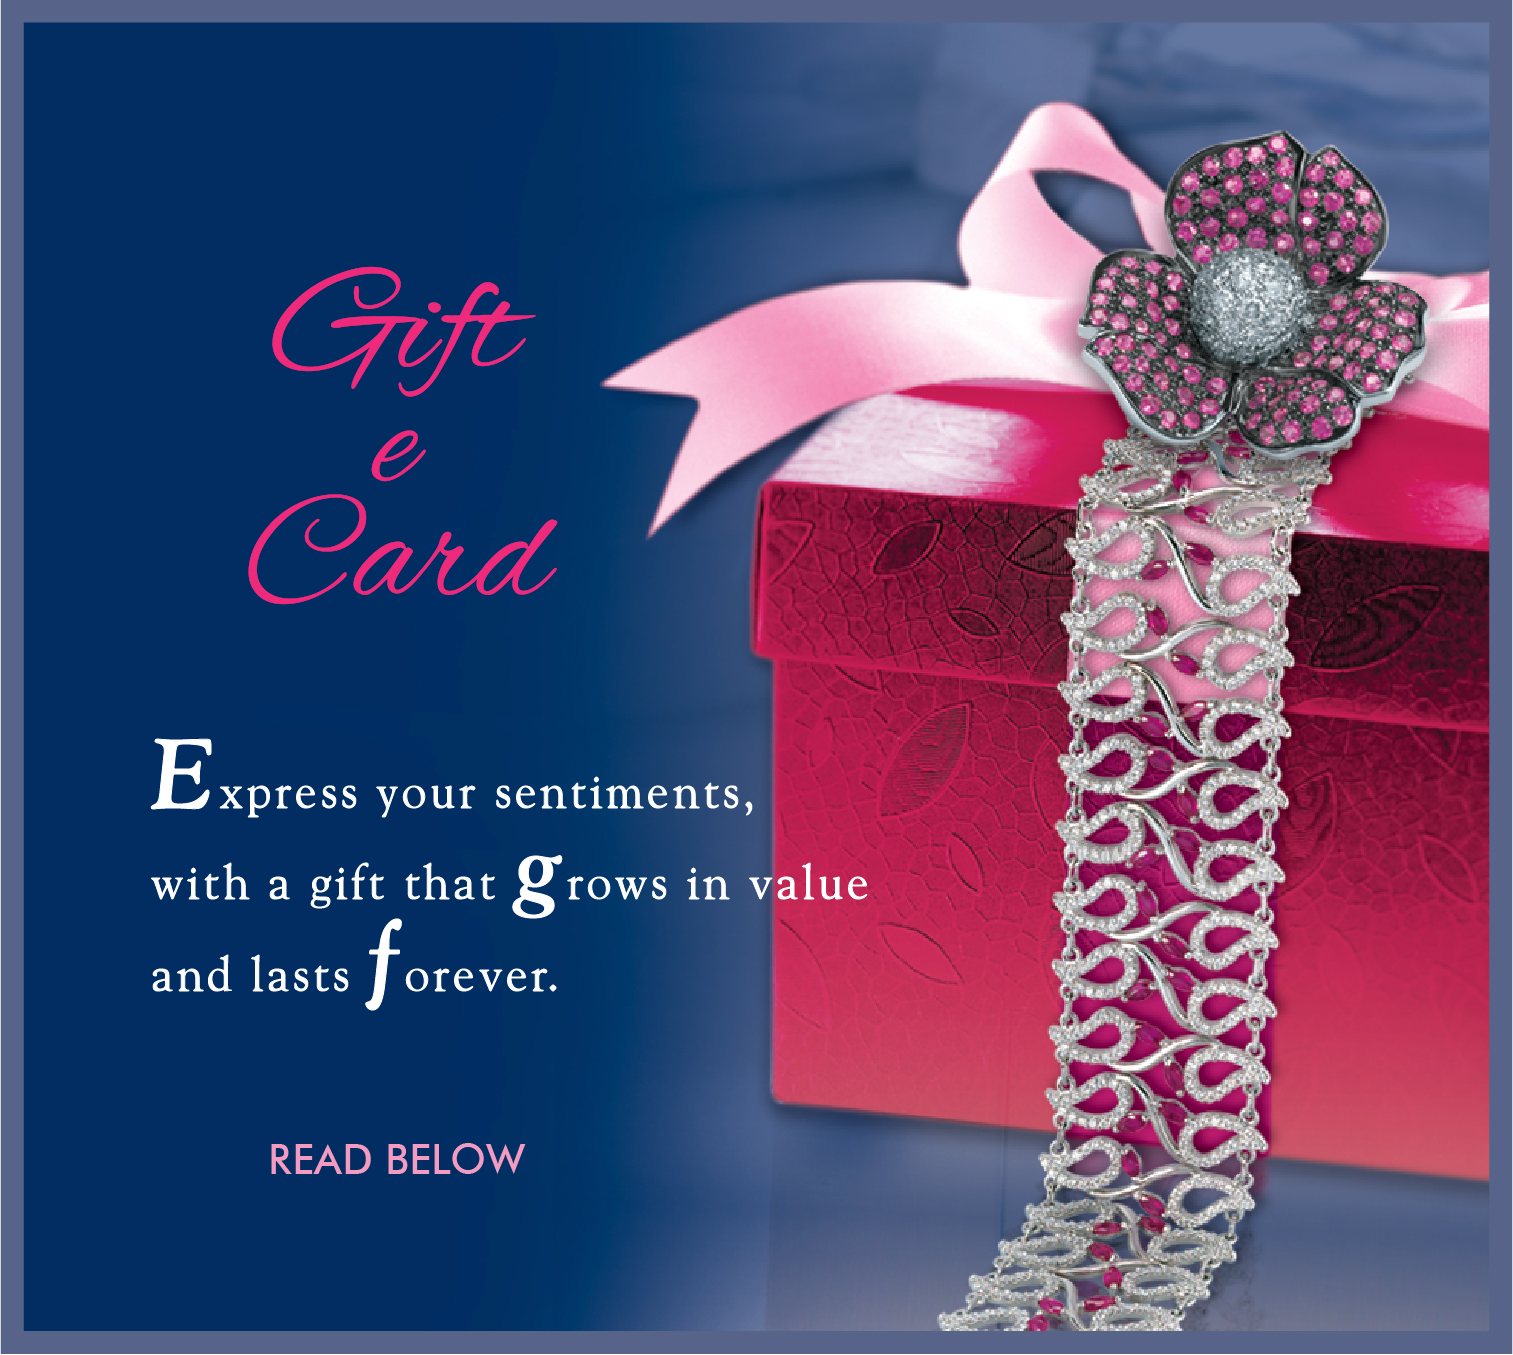 Buy Jewellery Gift Voucher. Gift Certificate. Choose From a Card Voucher or  Digital E-voucher. Valid for 1 Year. Online in India - Etsy